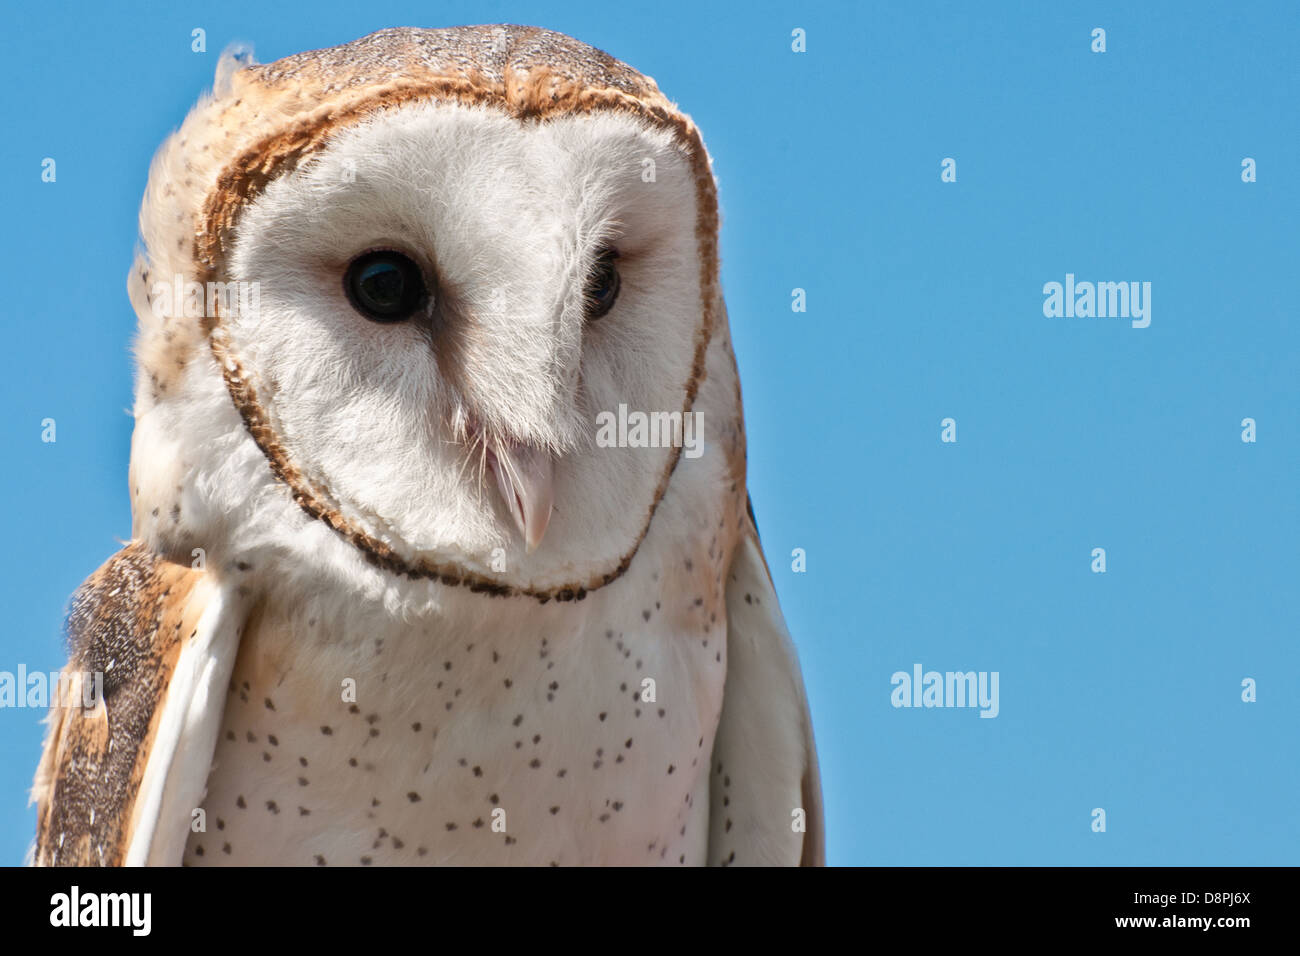 A close up of a Barn Owl Stock Photo